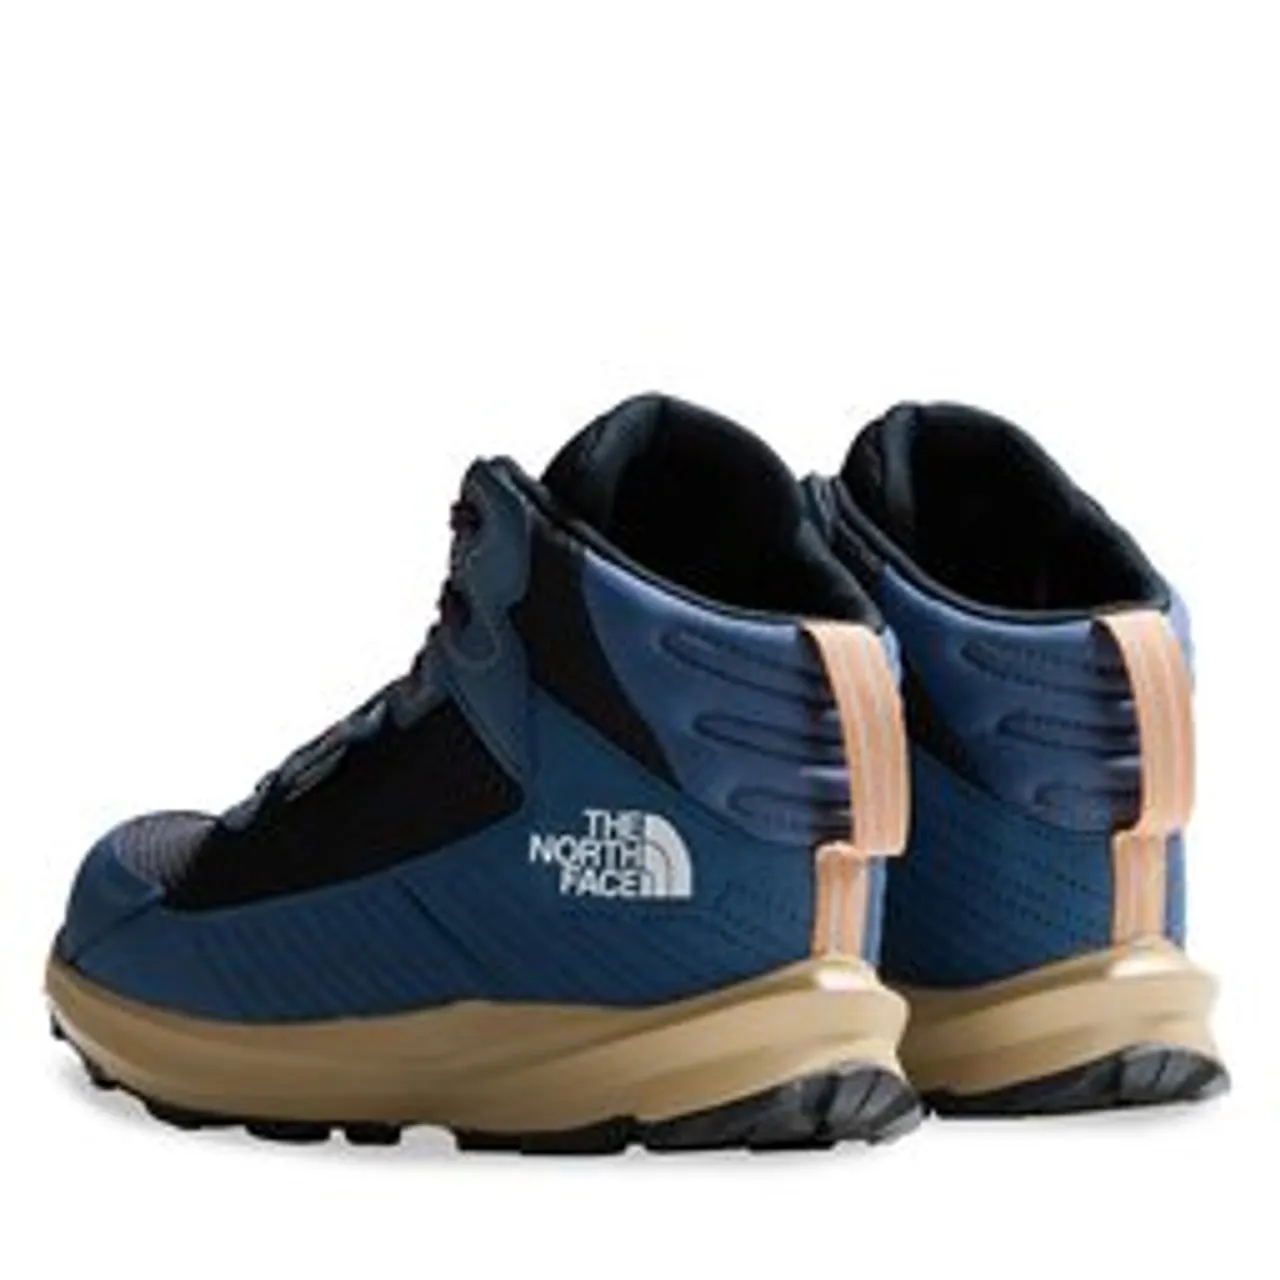 Trekkingschuhe The North Face Y Fastpack Hiker Mid WpNF0A7W5VVJY1 Shady Blue/Tnf White